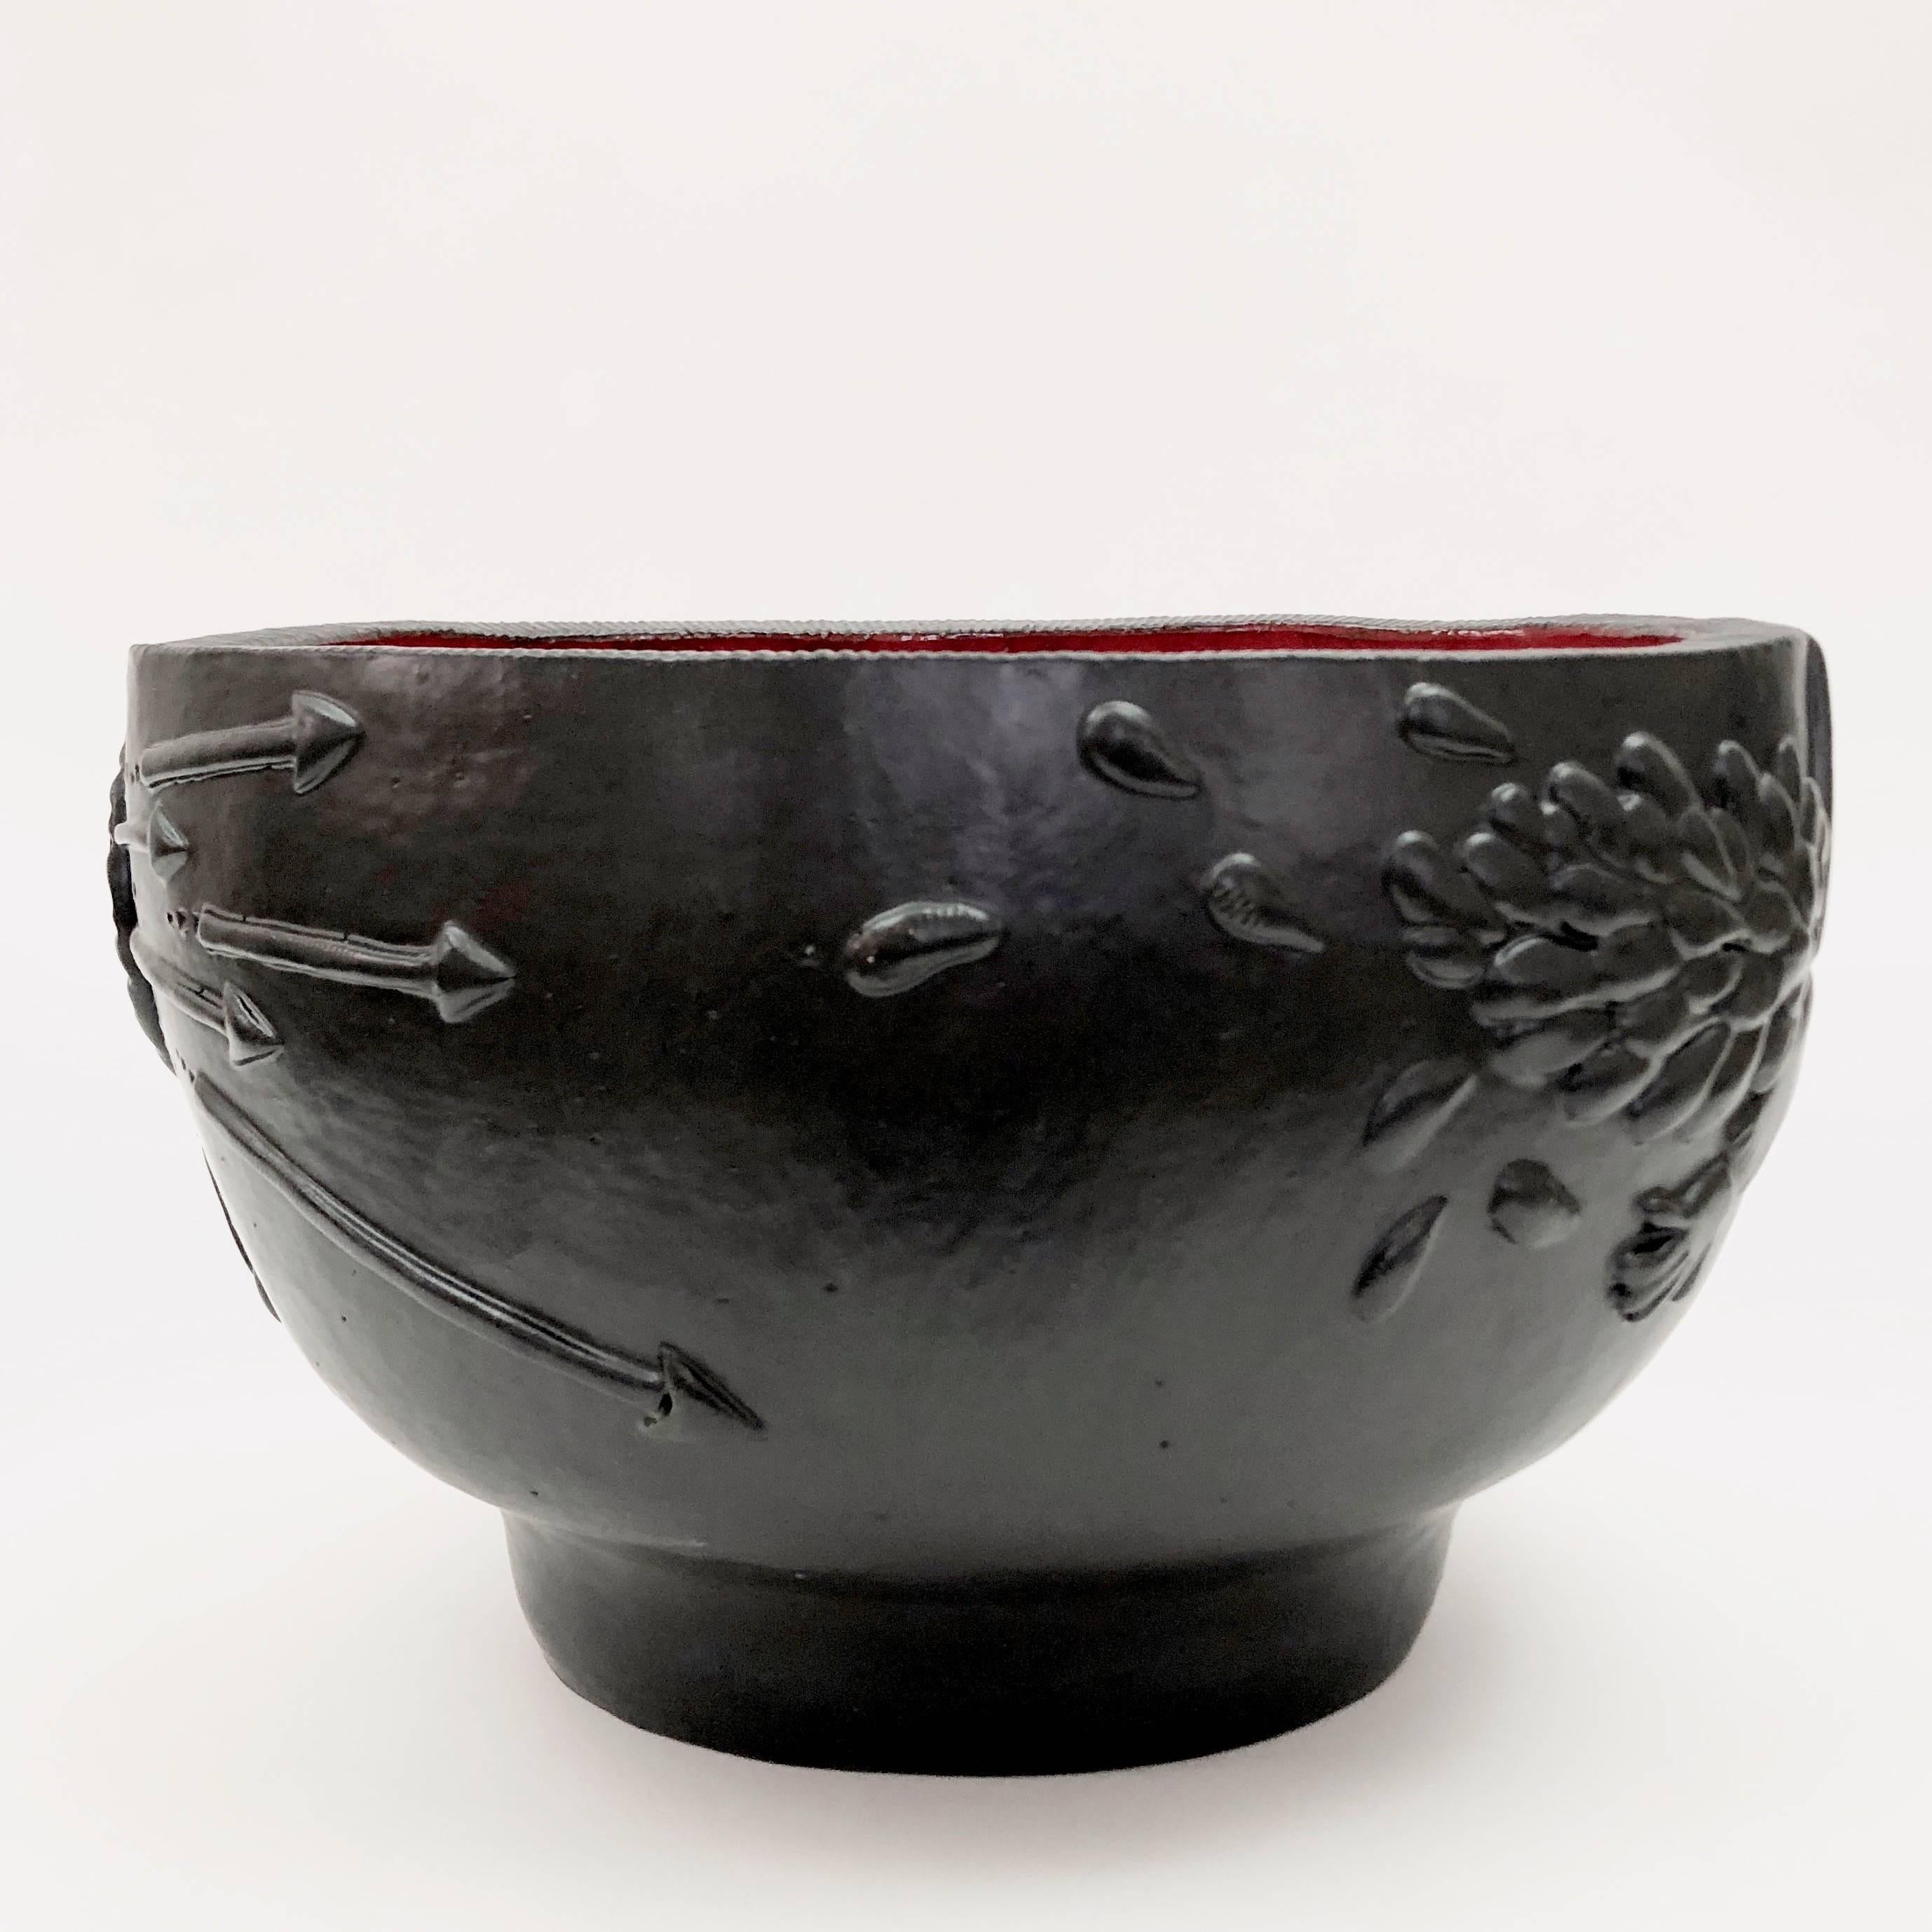 Large decorative ceramic bowl or centrepiece.
Stoneware glazed in matt black and glossy red, decorated with figurative and abstract elements that describe the Greek mythology famous story of the flight of Icarus.
One of a kind handcrafted piece